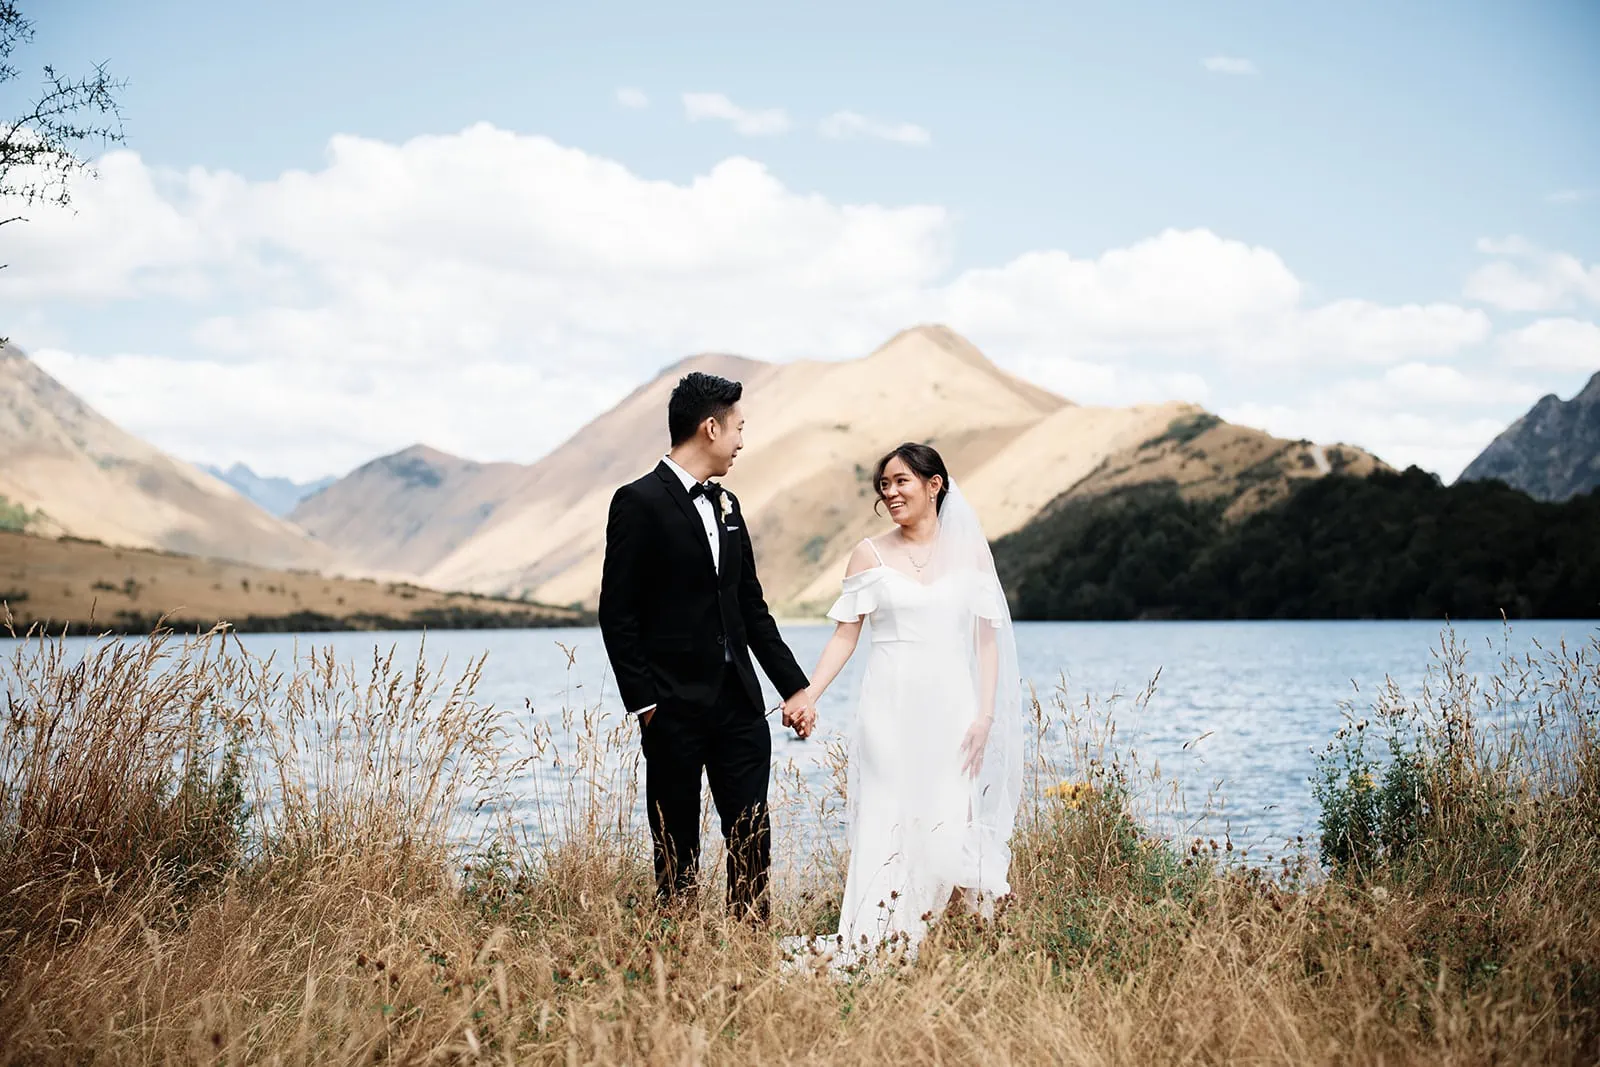 Dios & Carlyn | Queenstown Heli Pre Wedding with Mountains & Lake View